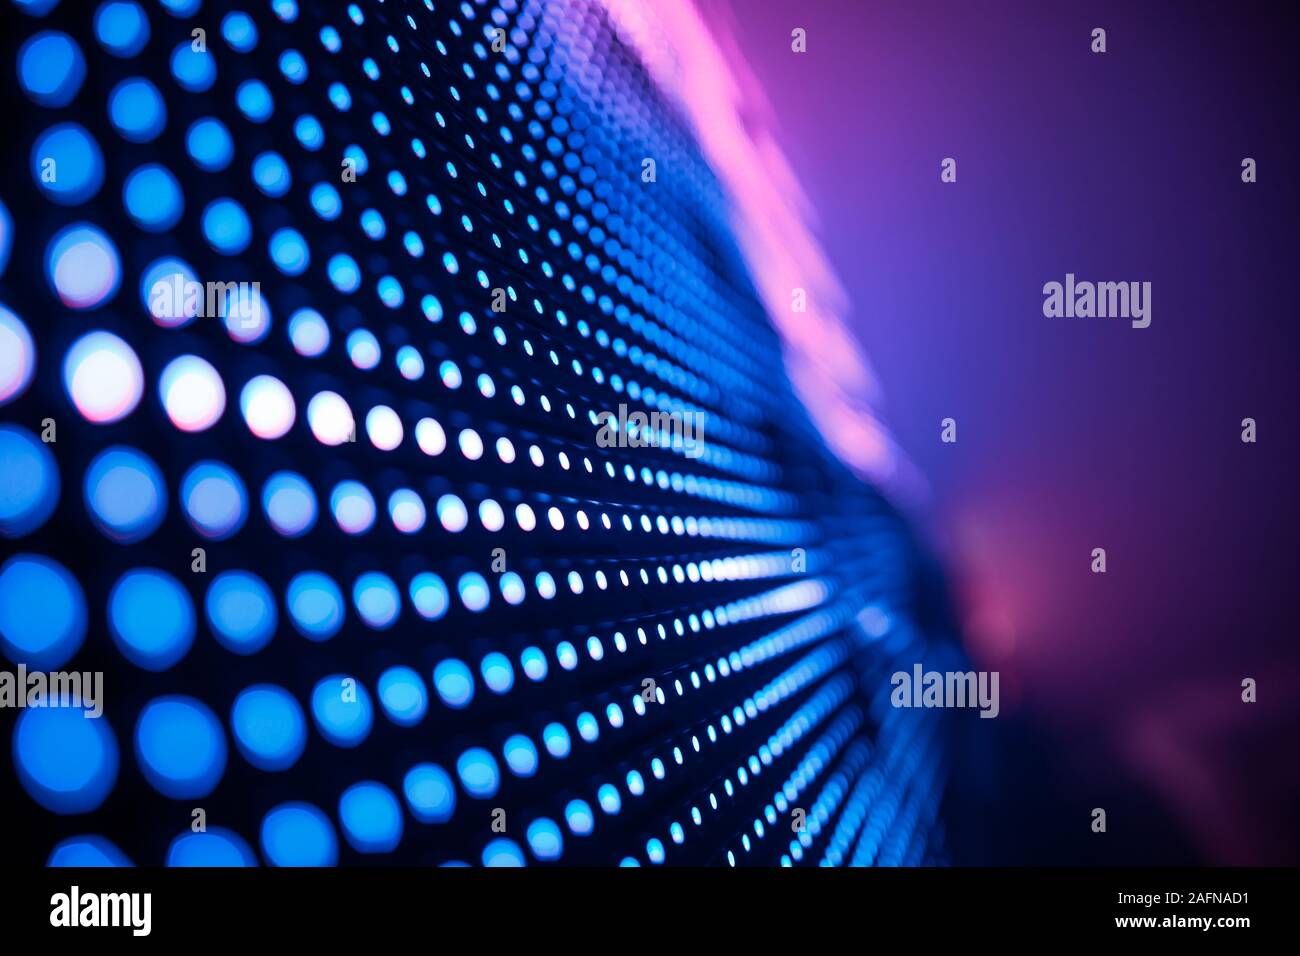 Abstract Led wall background with soft focus. Stock Photo